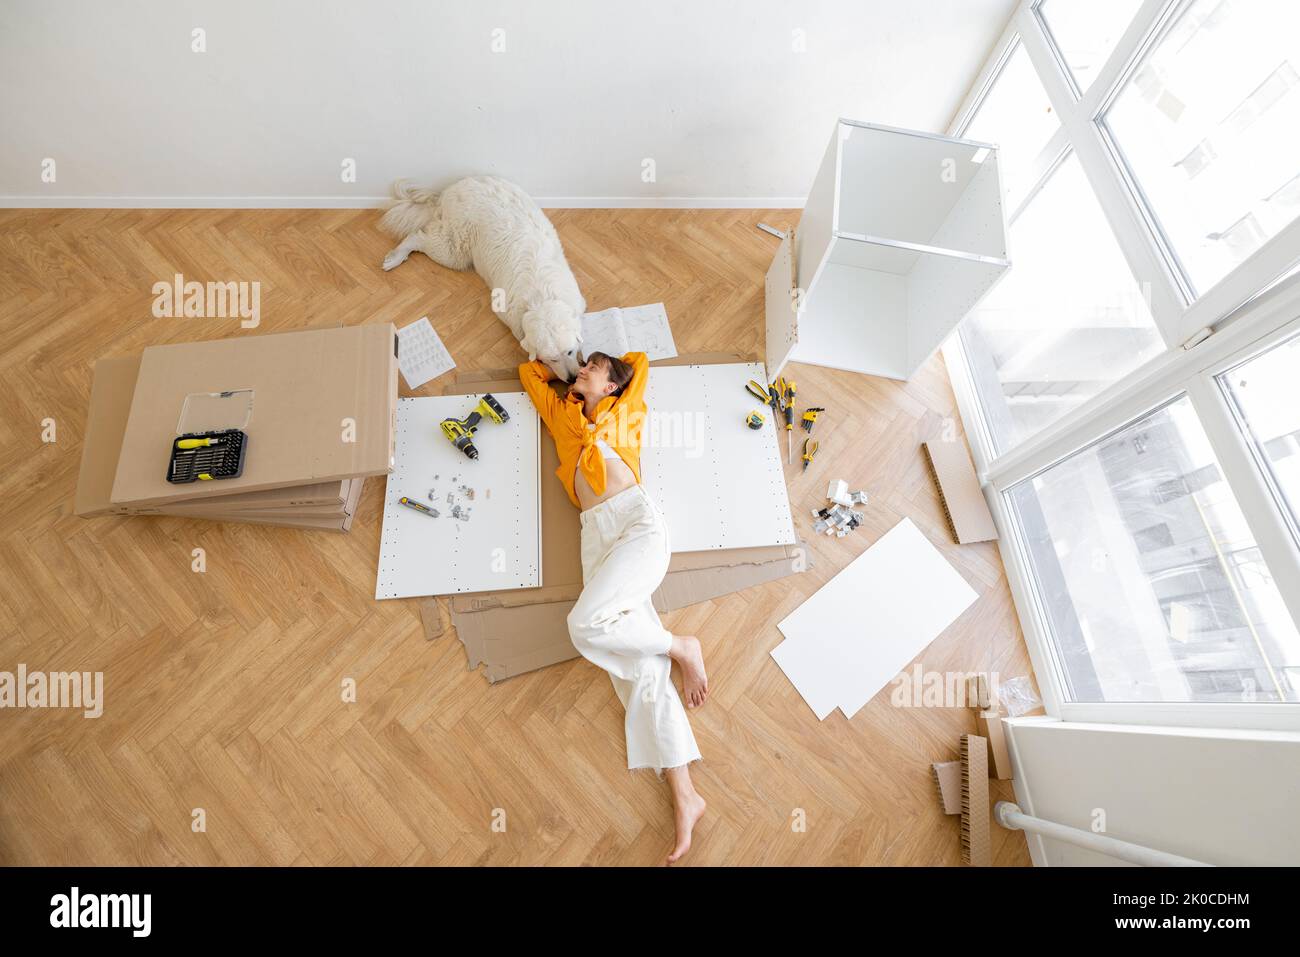 Young woman lies on floor with her cute dog, resting while making repairing at new apartment, top view. Young woman assembling furniture by herself. D Stock Photo